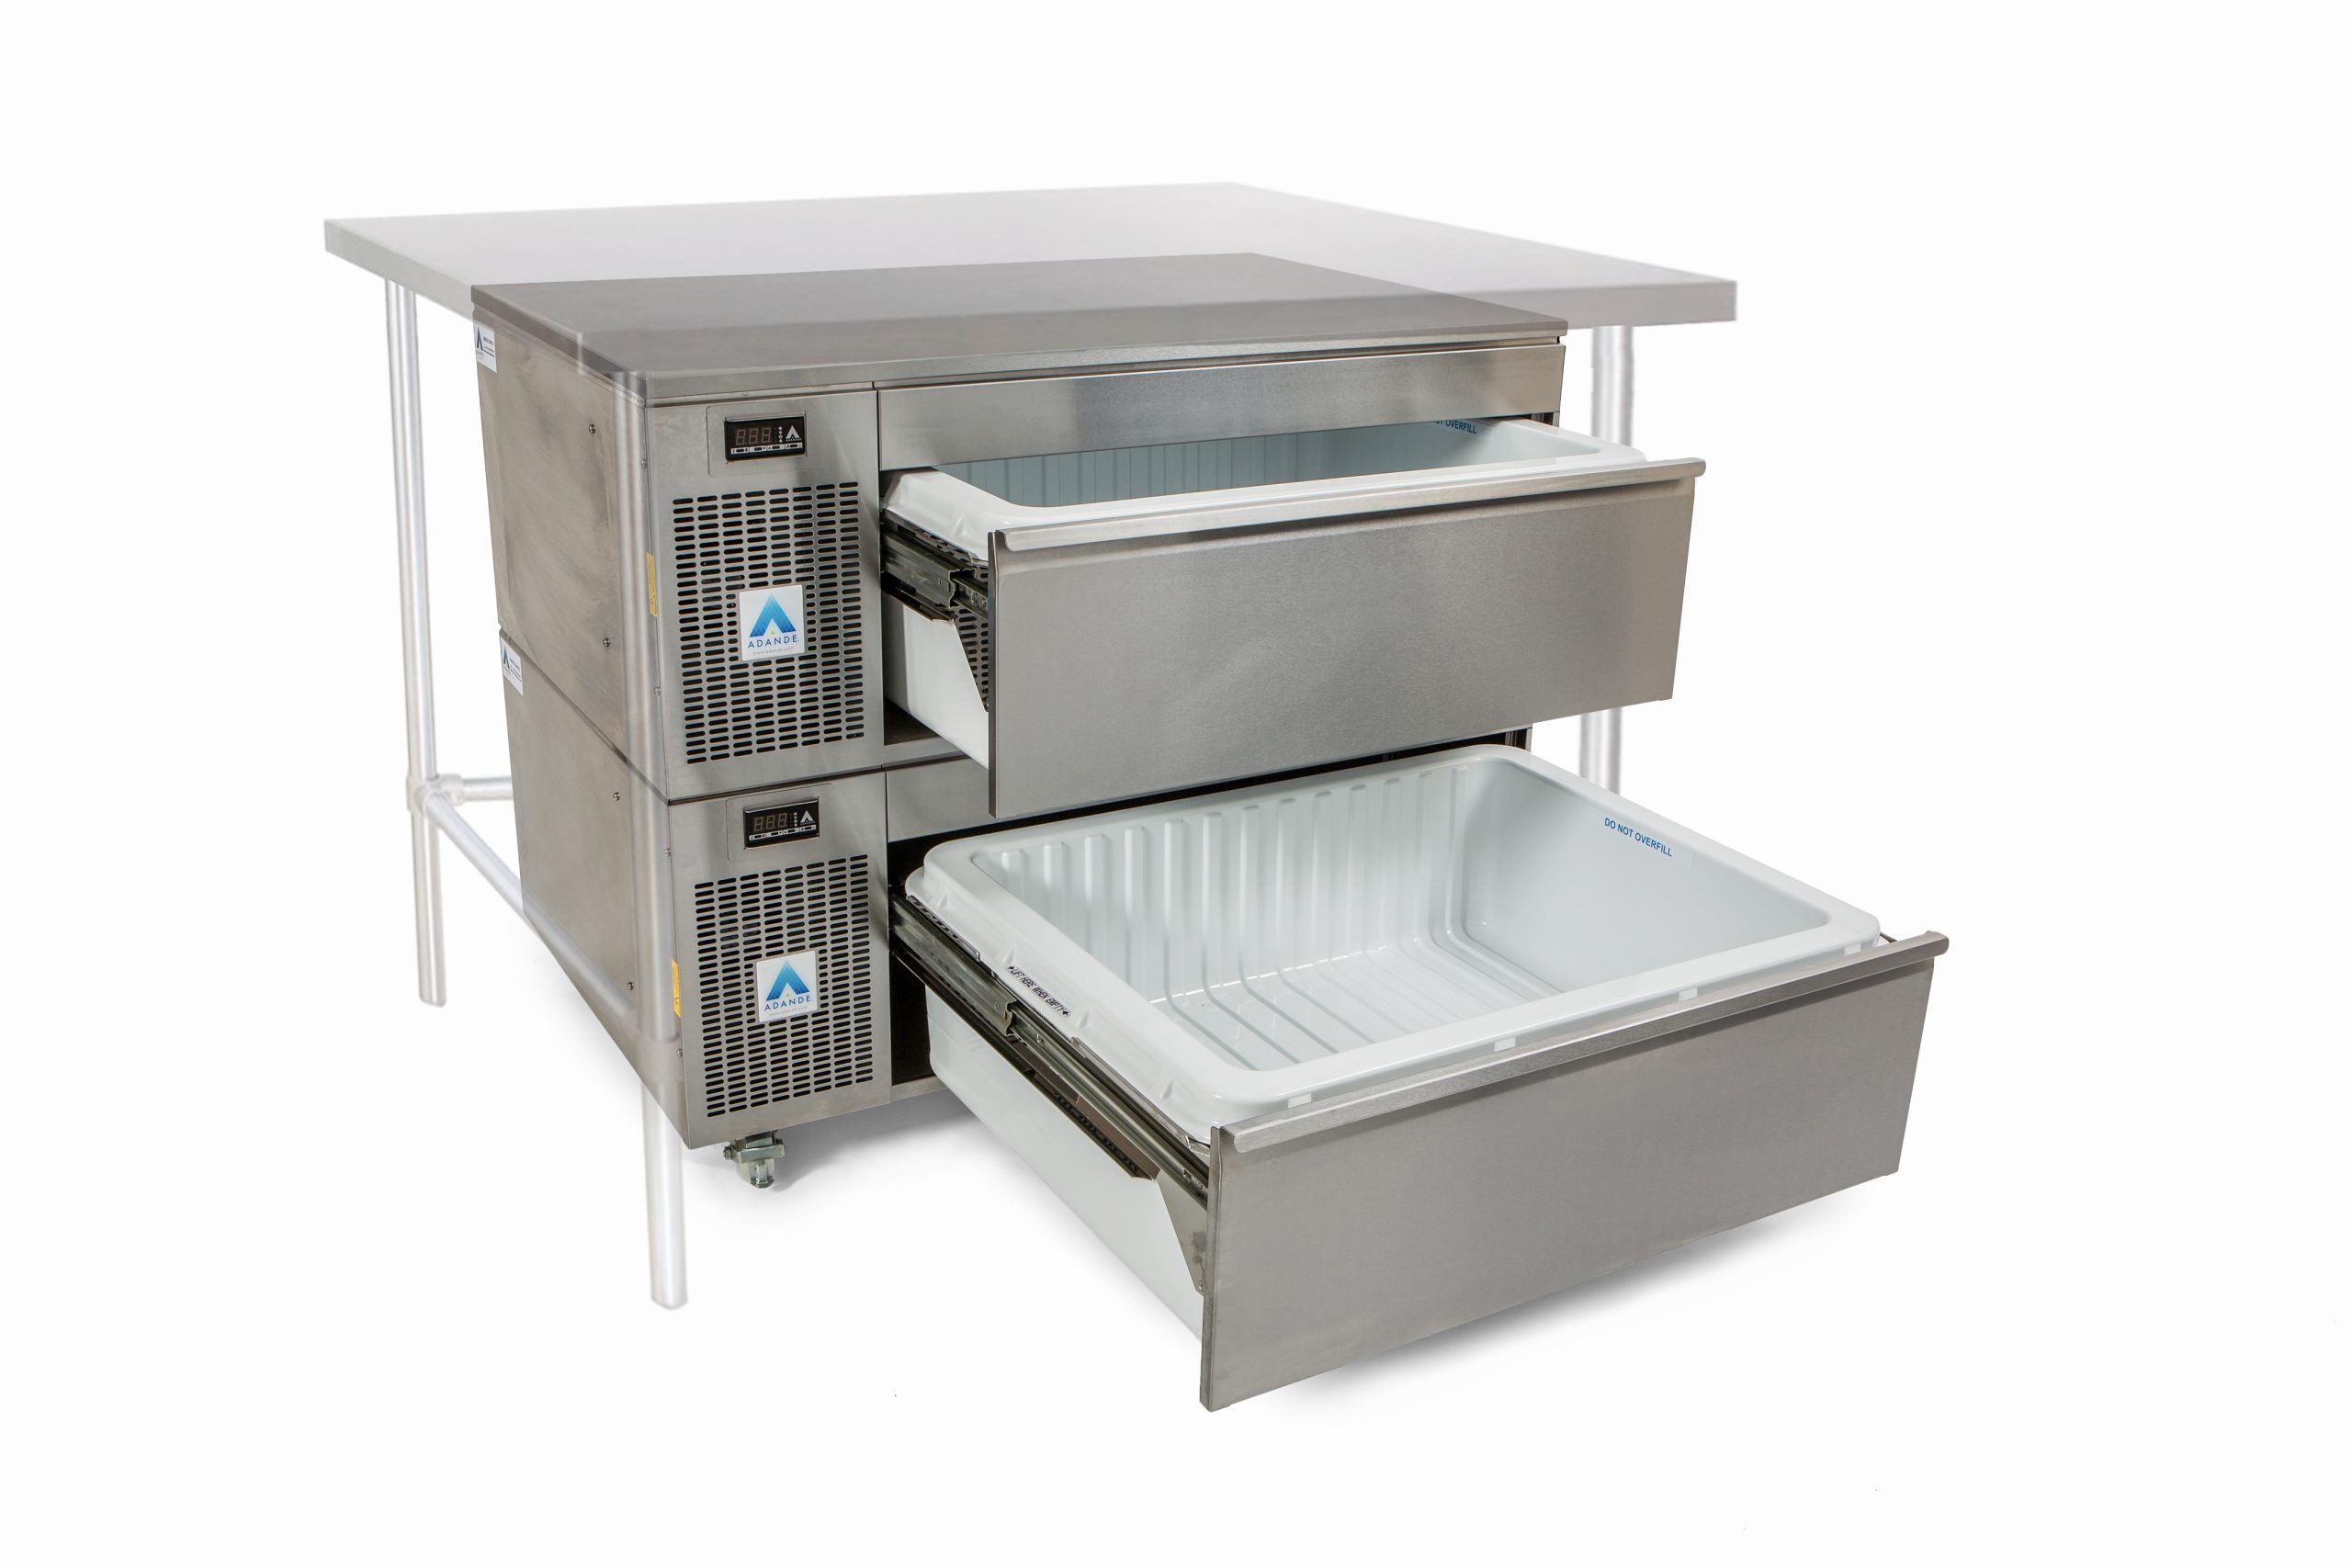 ADANDE – HOTEL REFRIGERATION PRODUCTS / HOTEL REFRIGERATED DRAWERS